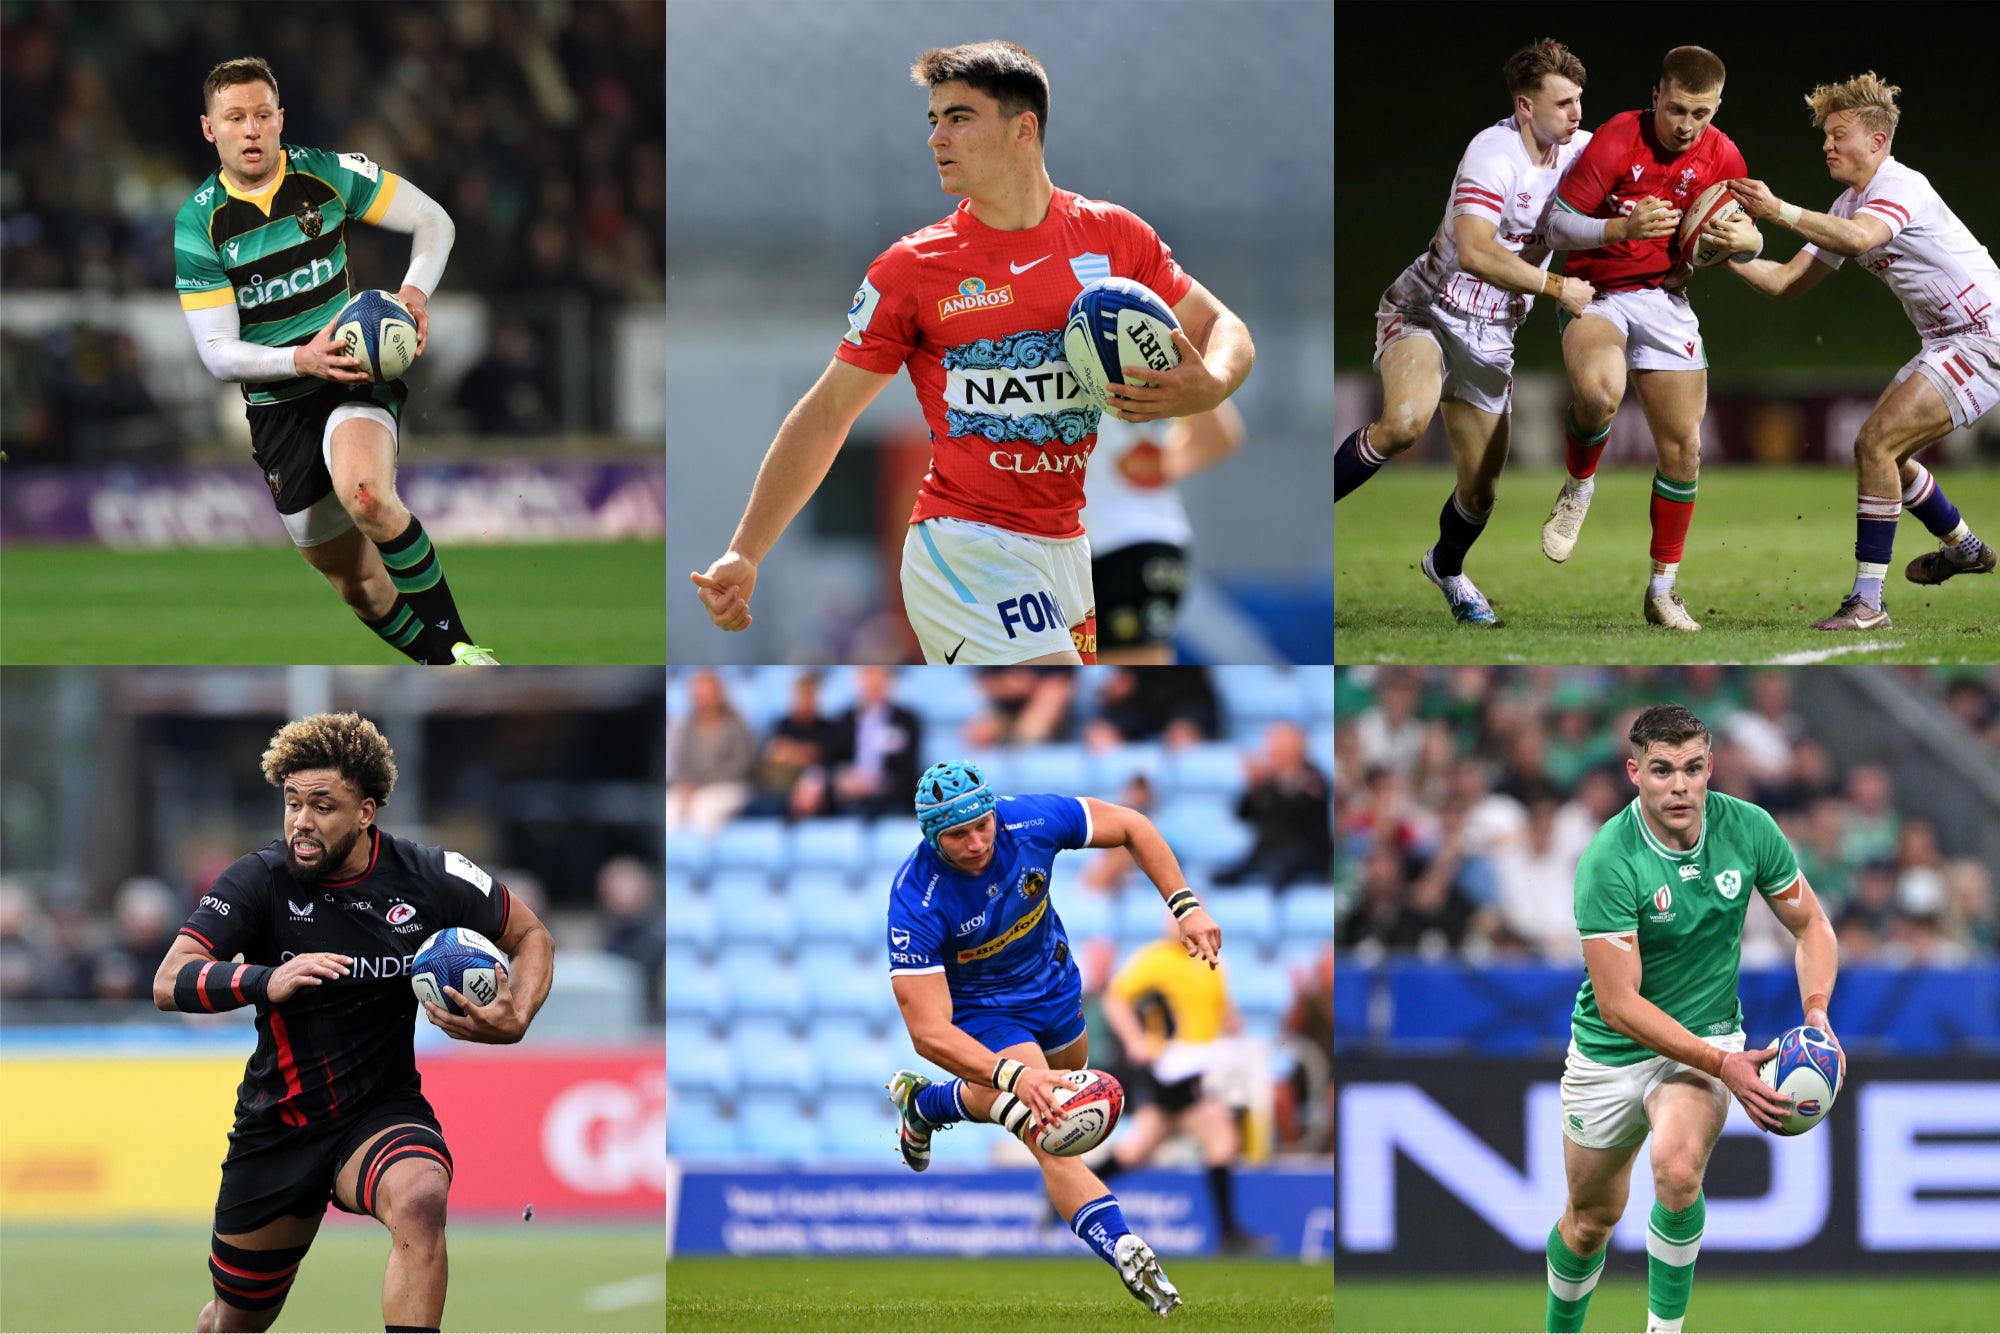 A number of new faces look set to star in the Six Nations